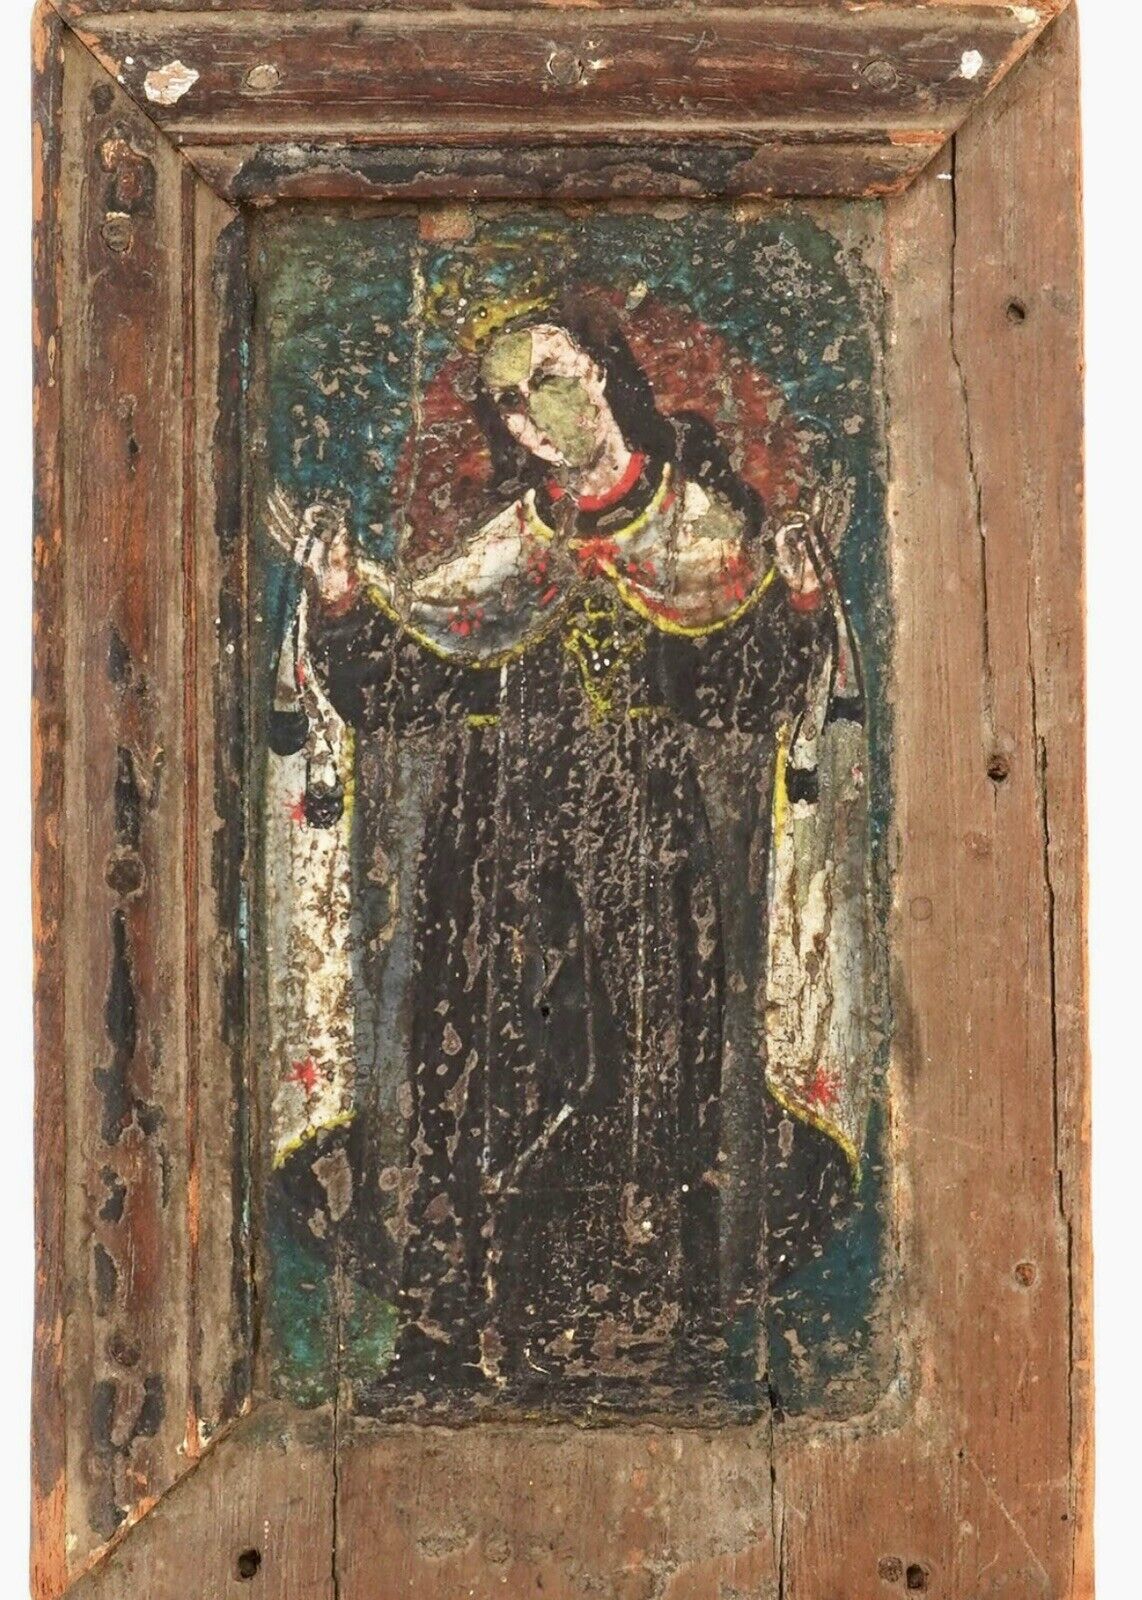 Century Old Mexican Retablo on Wood Panel, Our Lady of Carmel Antique Painting